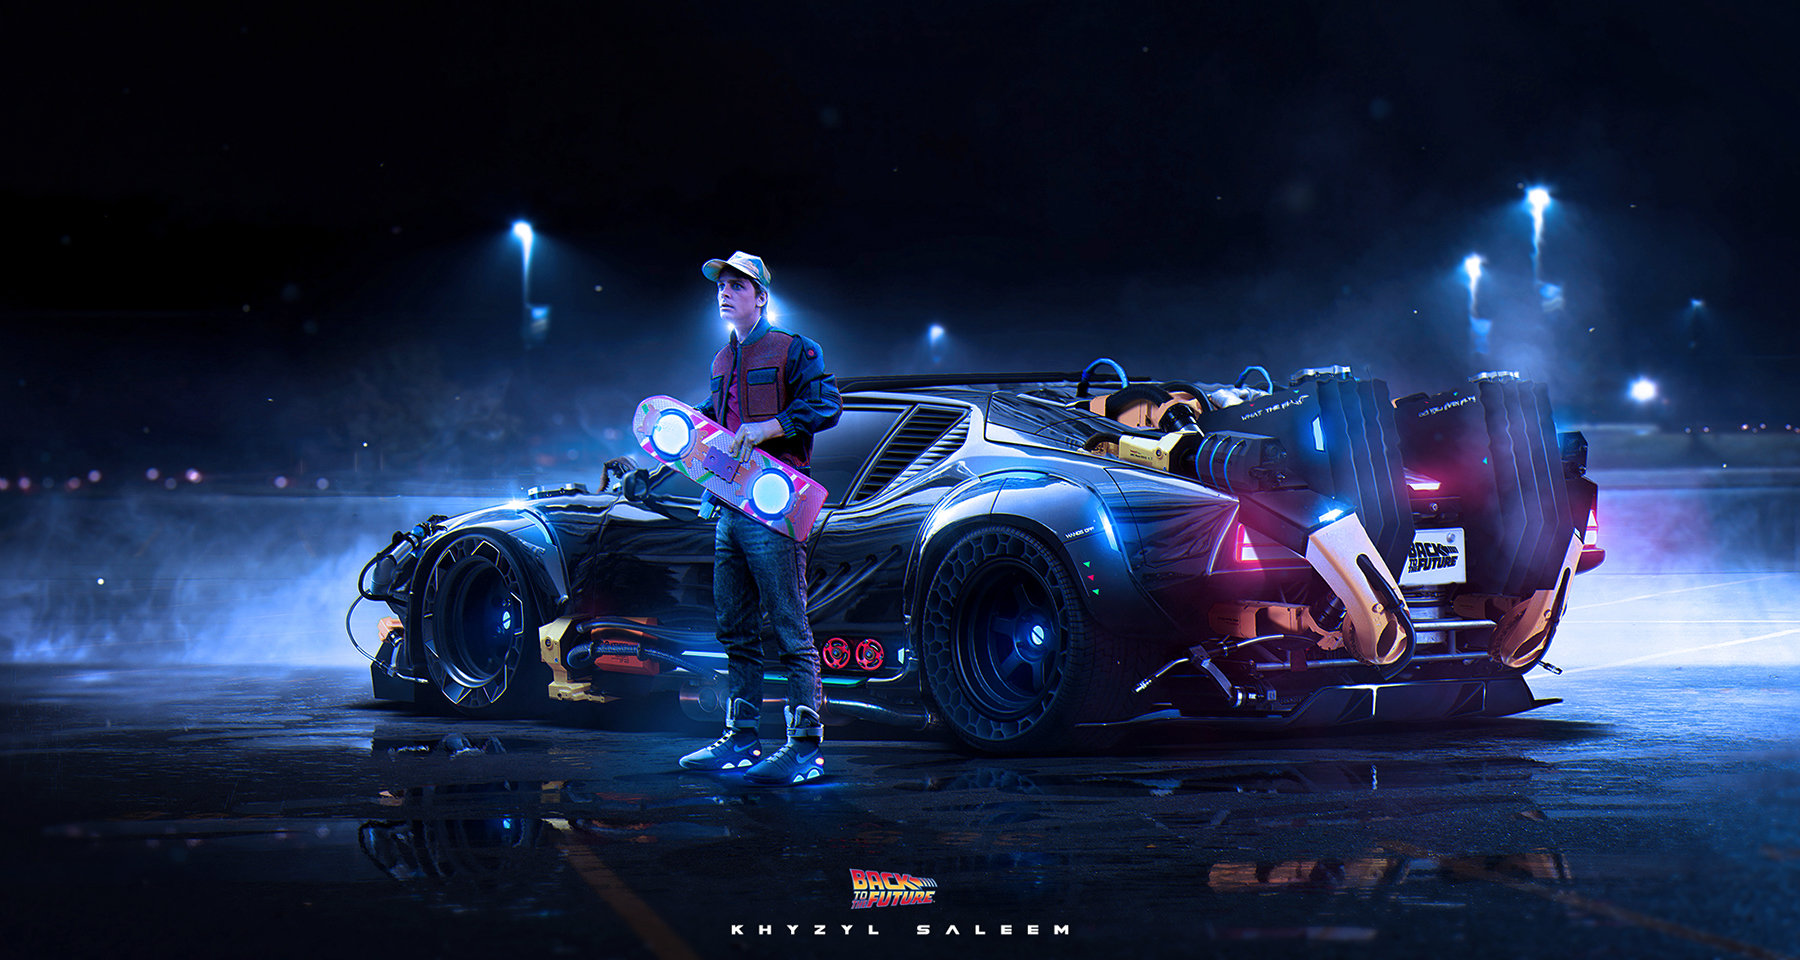 46 Back To The Future Modern FHDQ Wallpapers - HBC333 Gallery